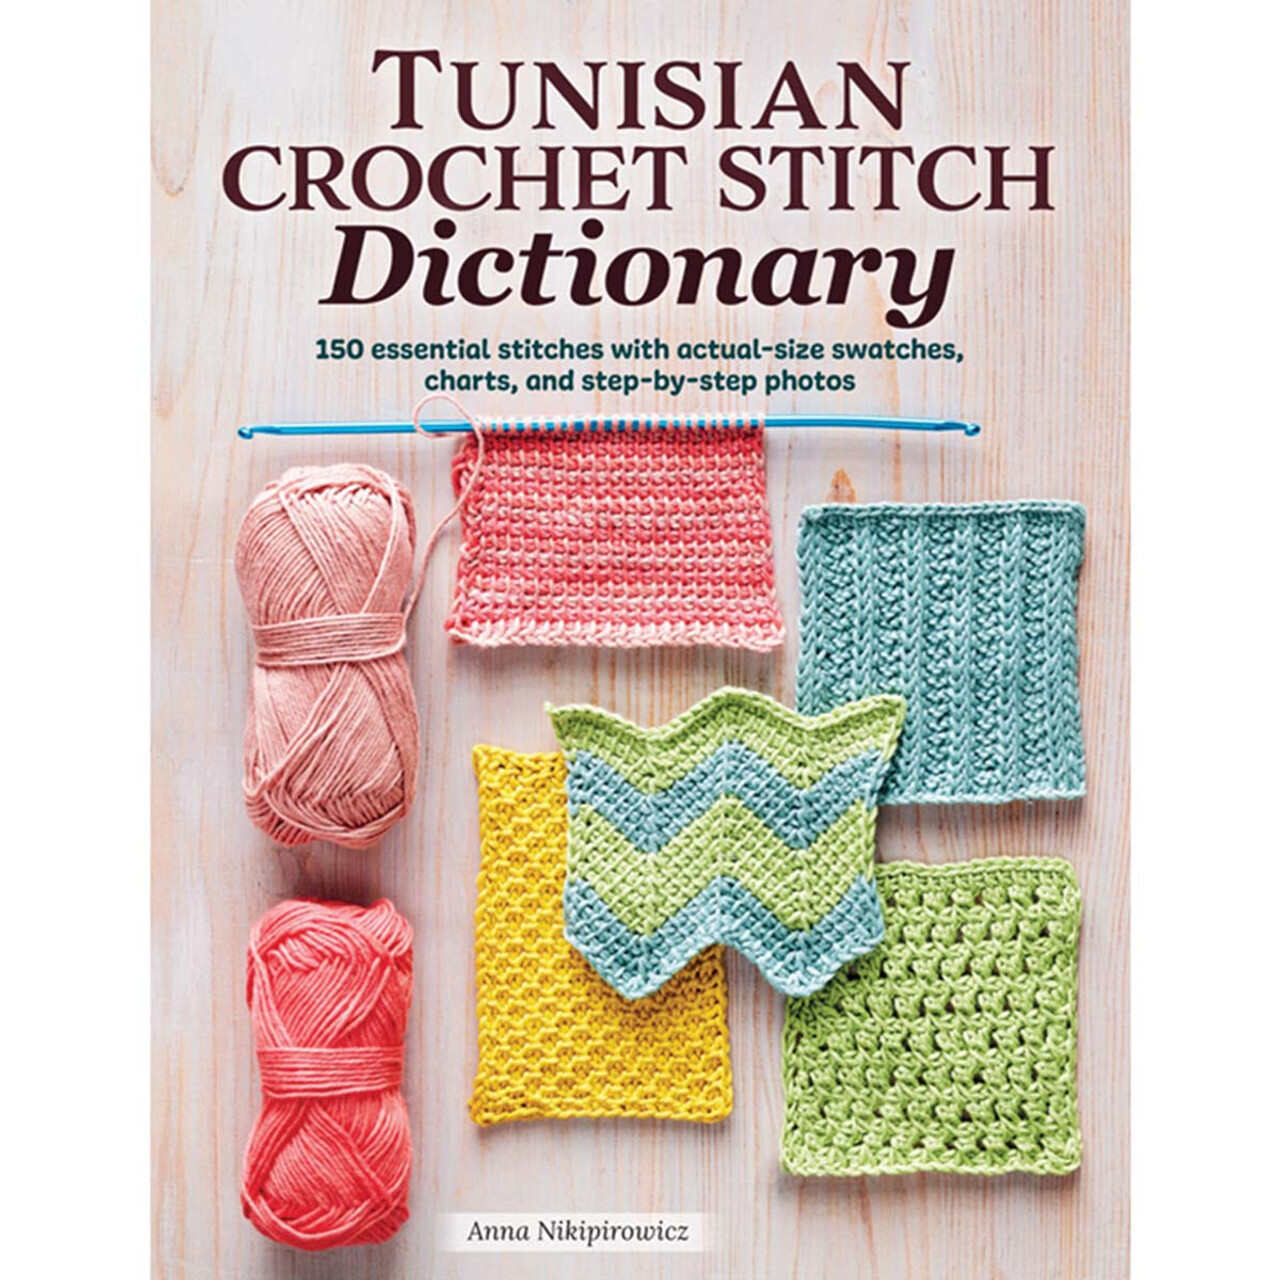 Best Rated and Reviewed in Crocheting Books 